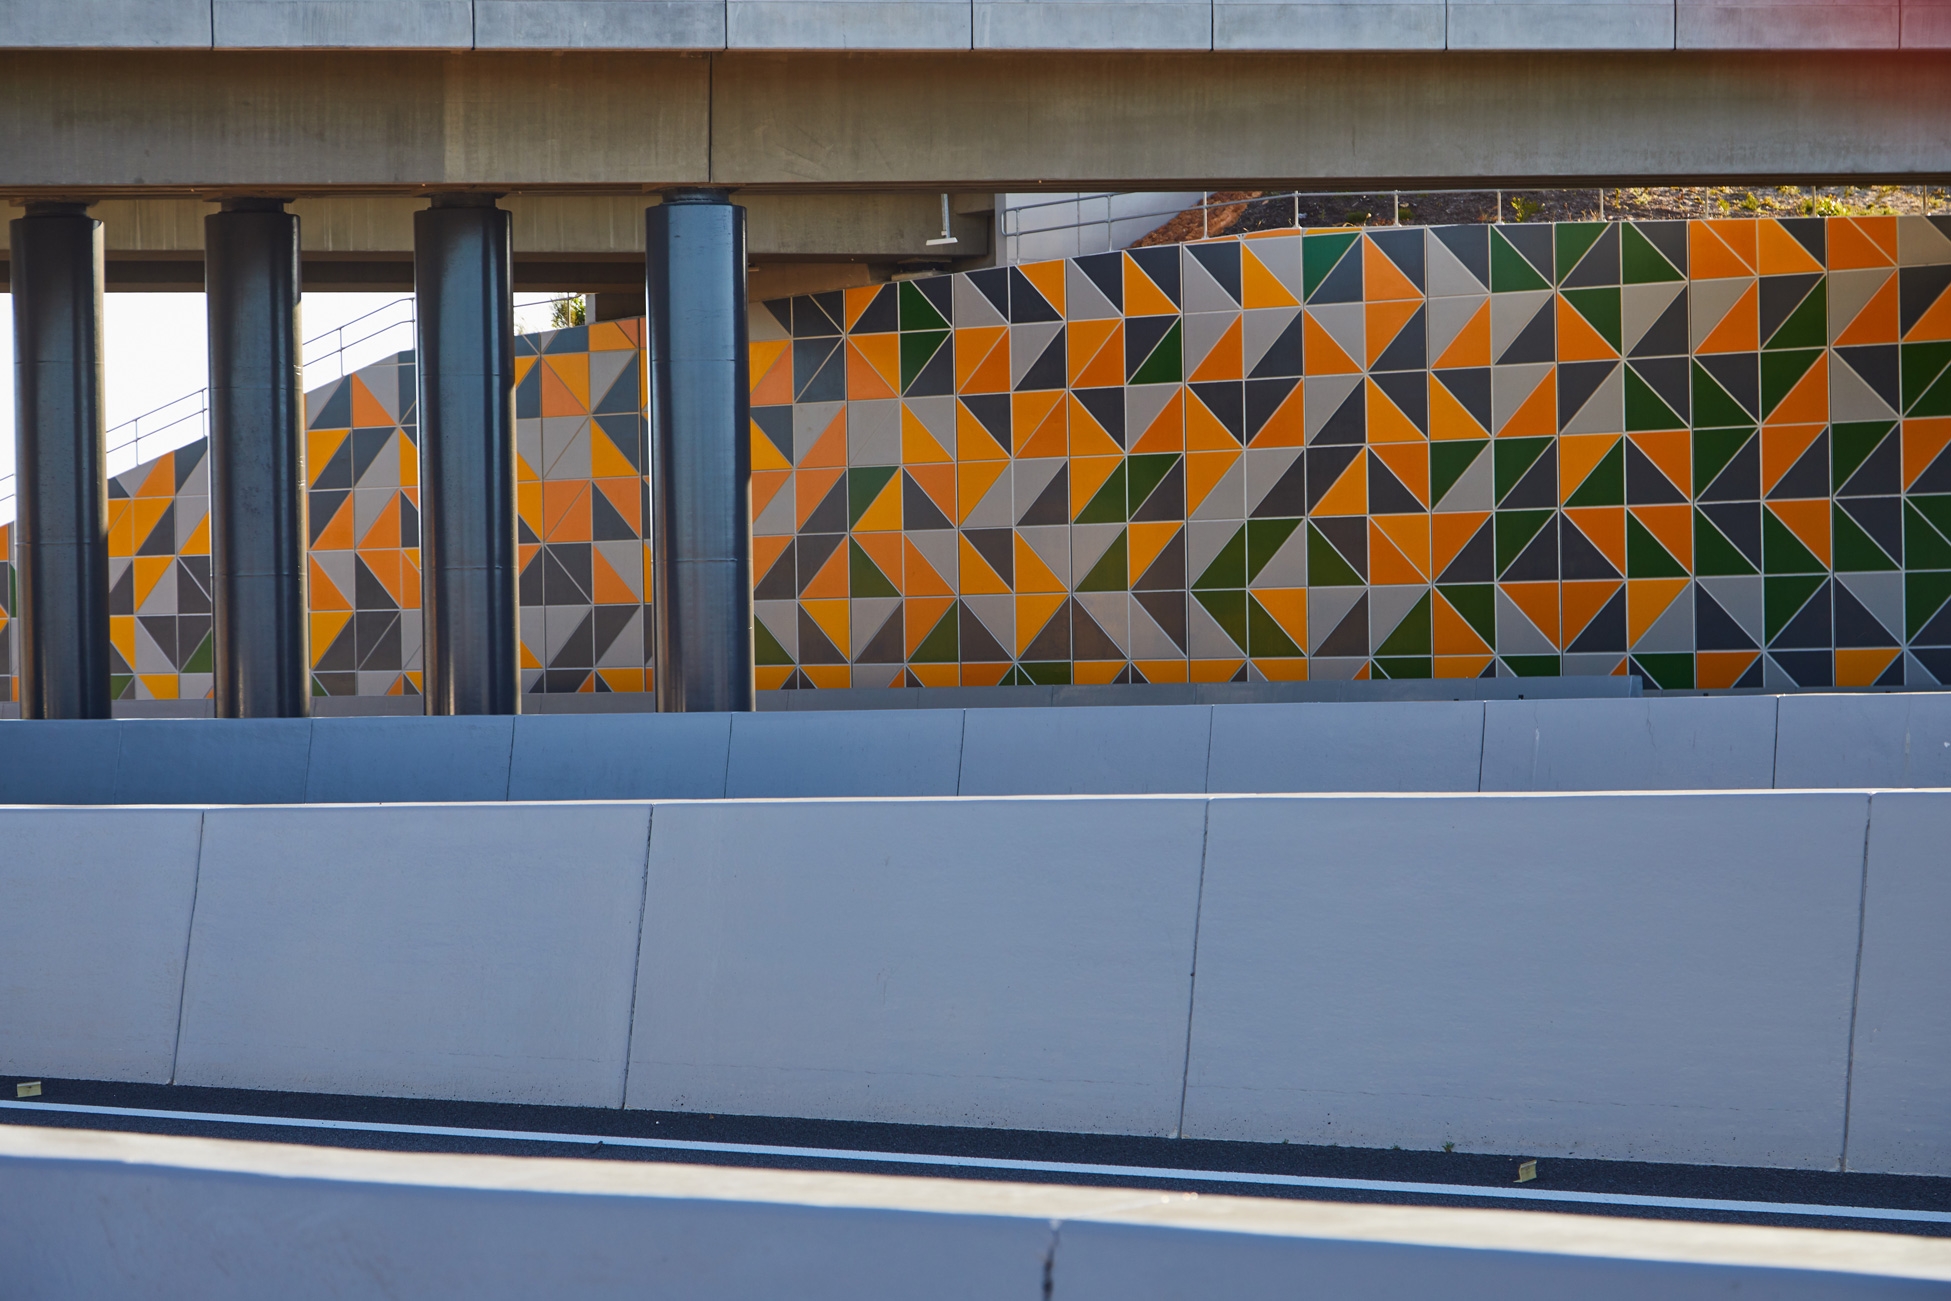 TerraTilt precast concrete retaining walls with coloured facade lining a new road highway.